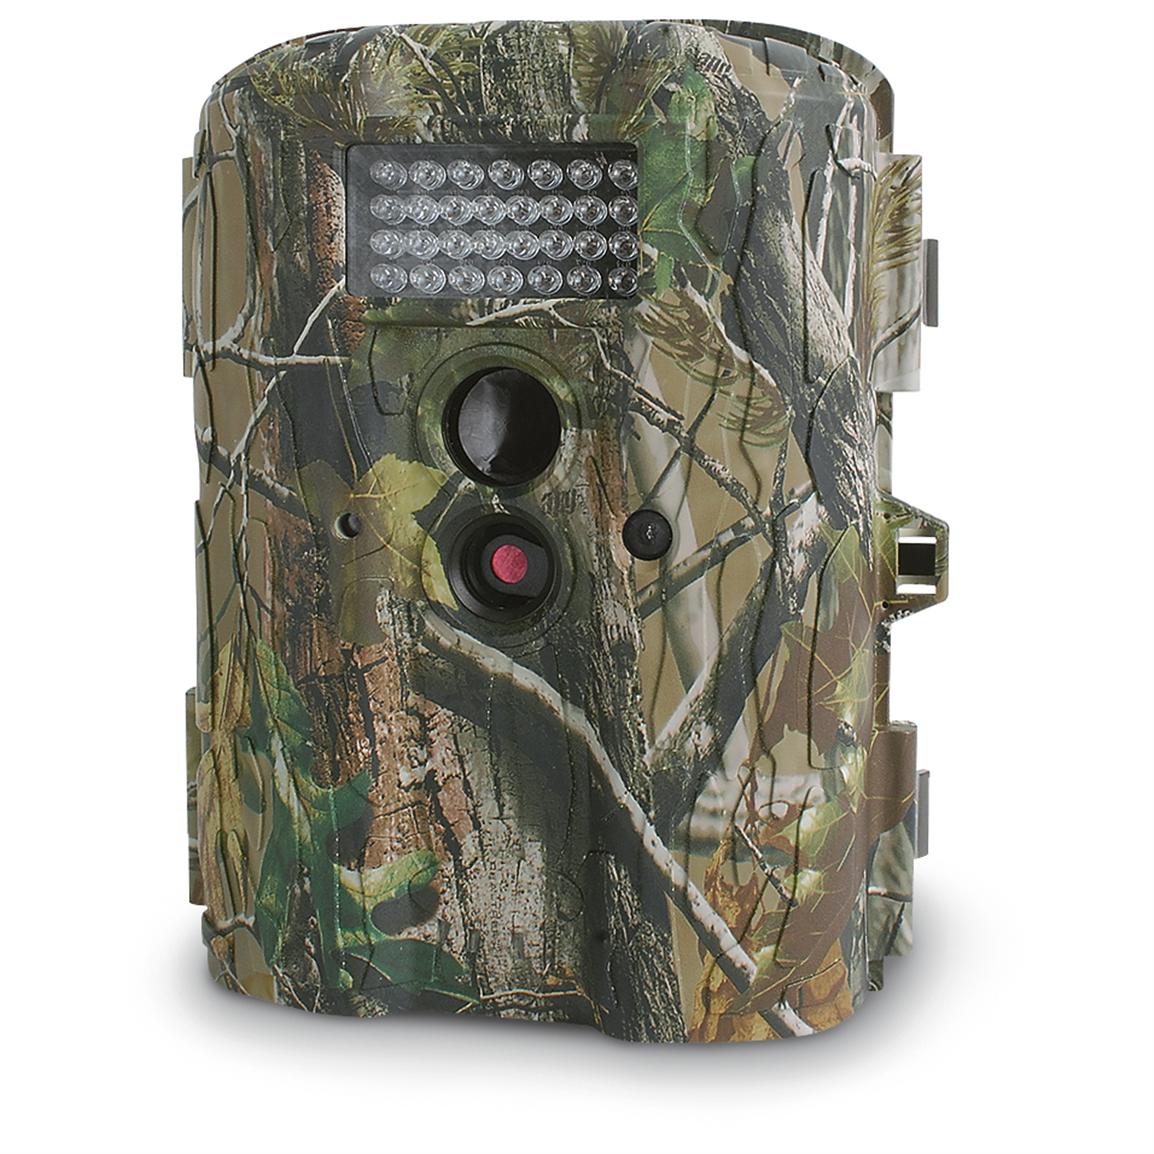 Moultrie Game Cameras And Trail Cameras